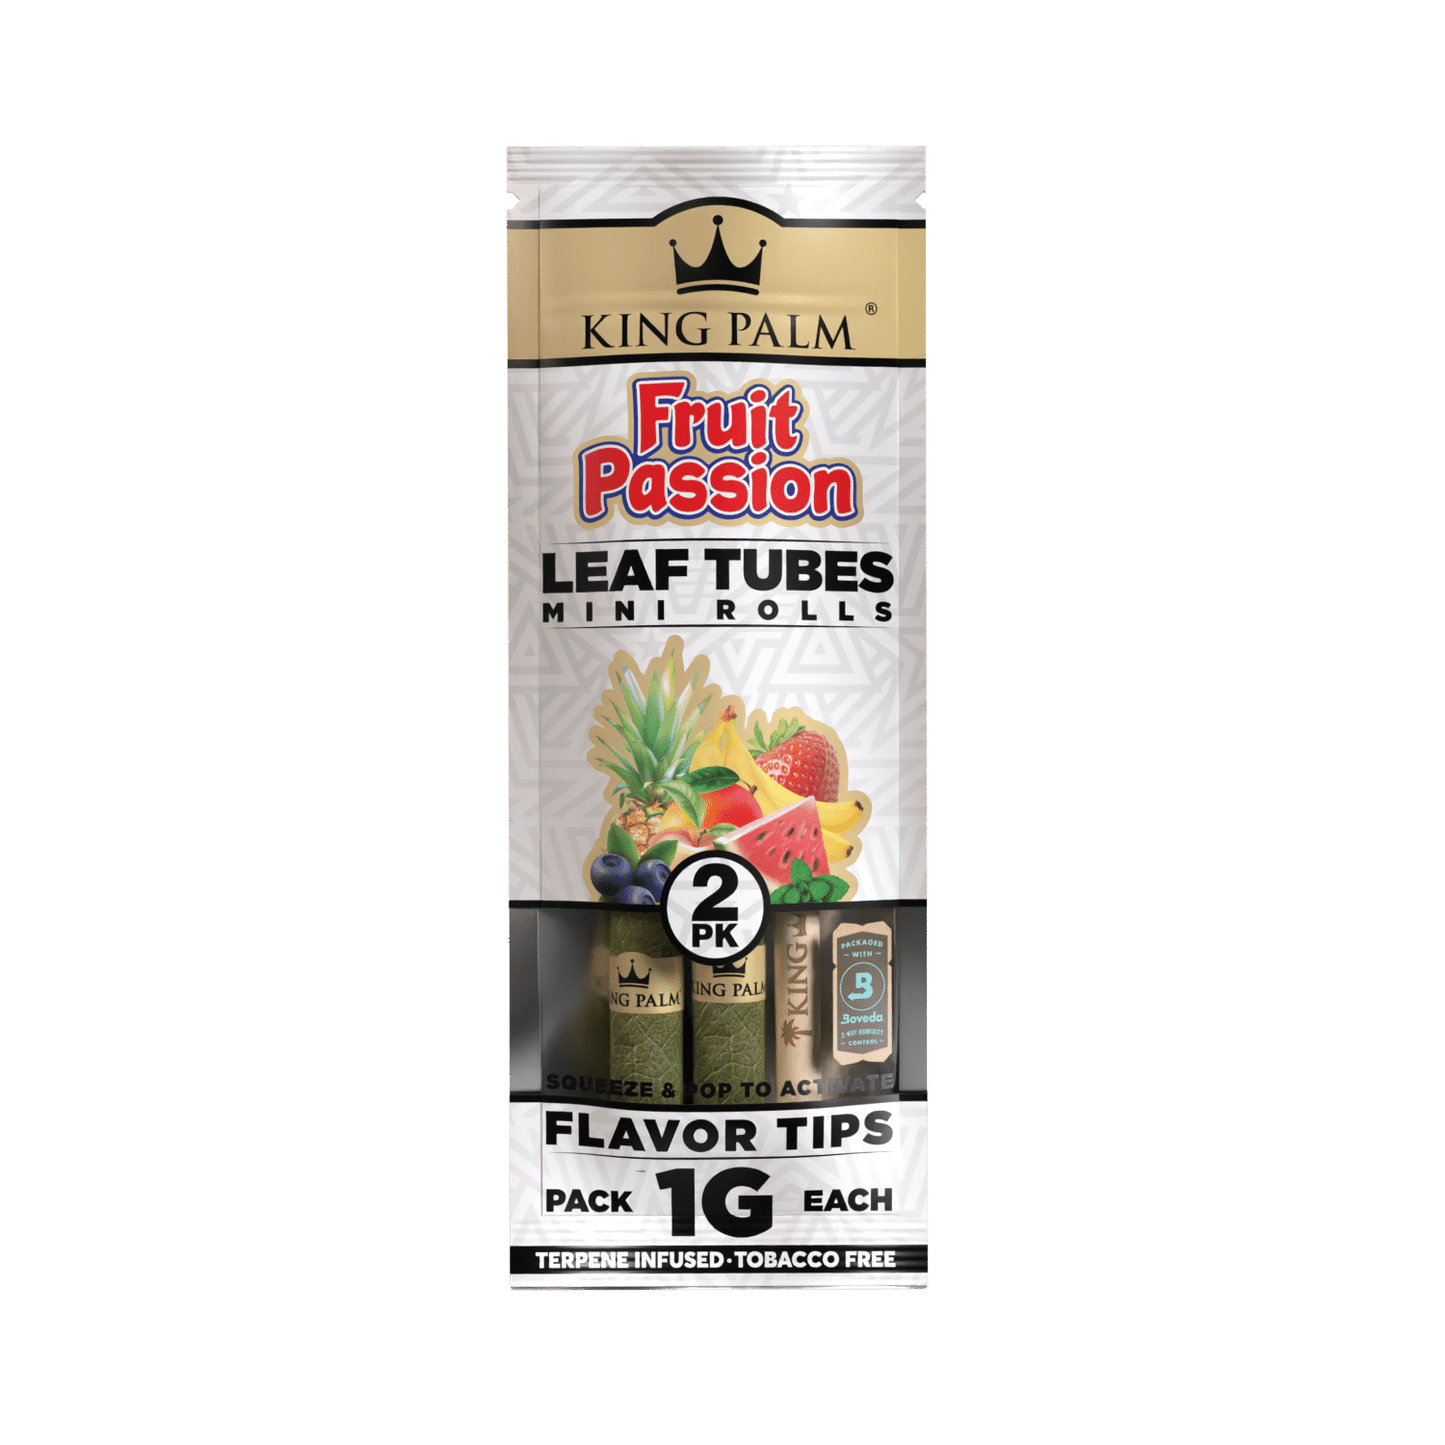 King Palm - Flavored Rolls, Minis (1g), Pack of 2